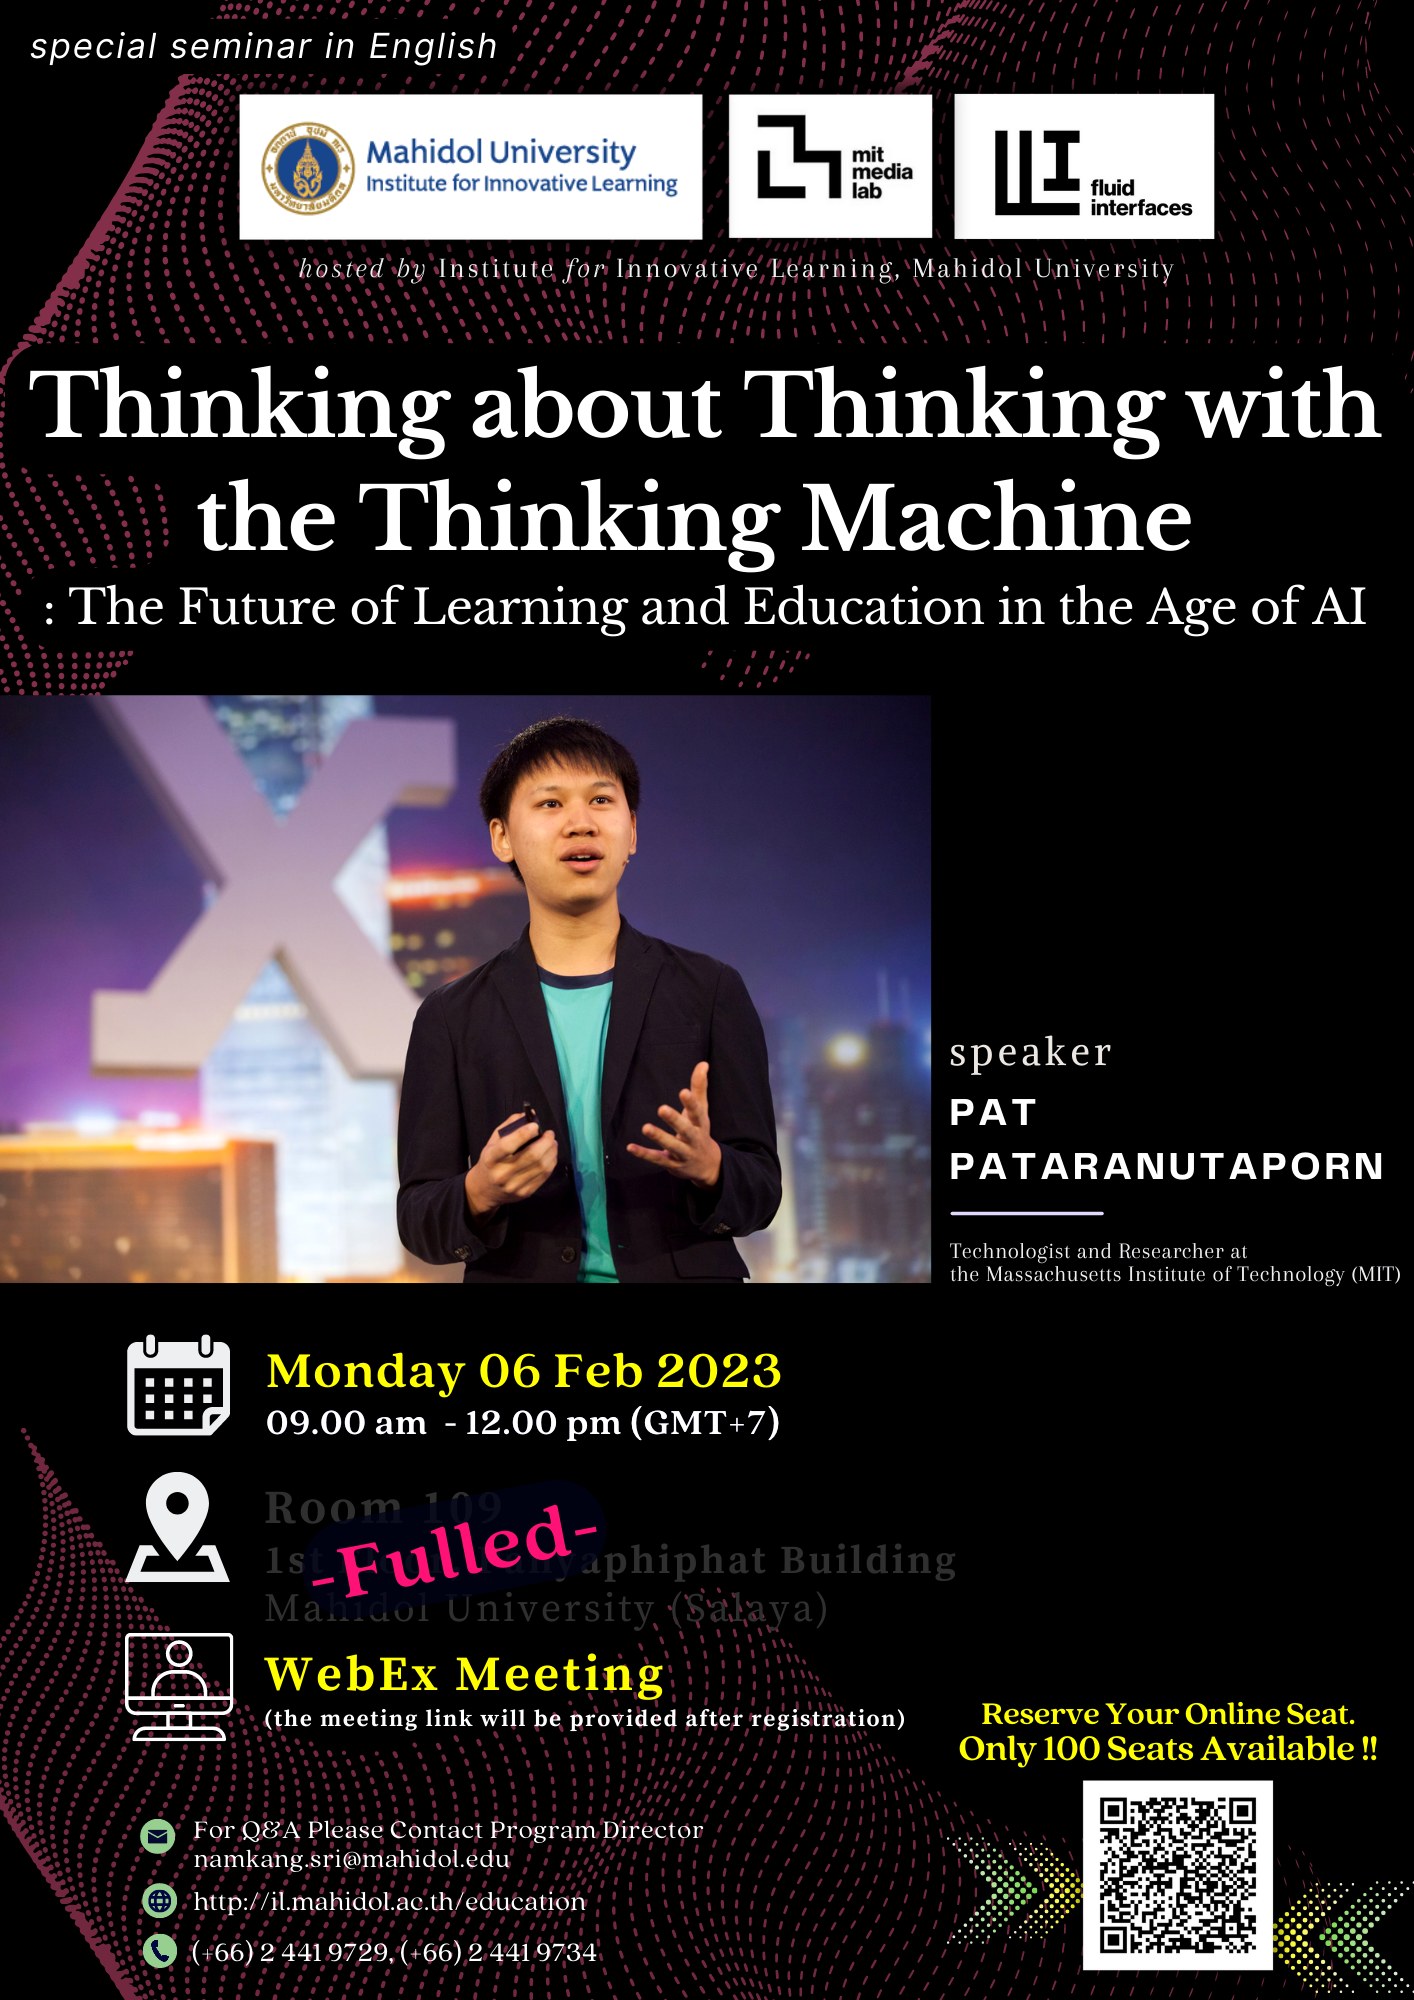 Special Seminar “Thinking about thinking with the thinking machine: The future of learning and education in the age of AI”